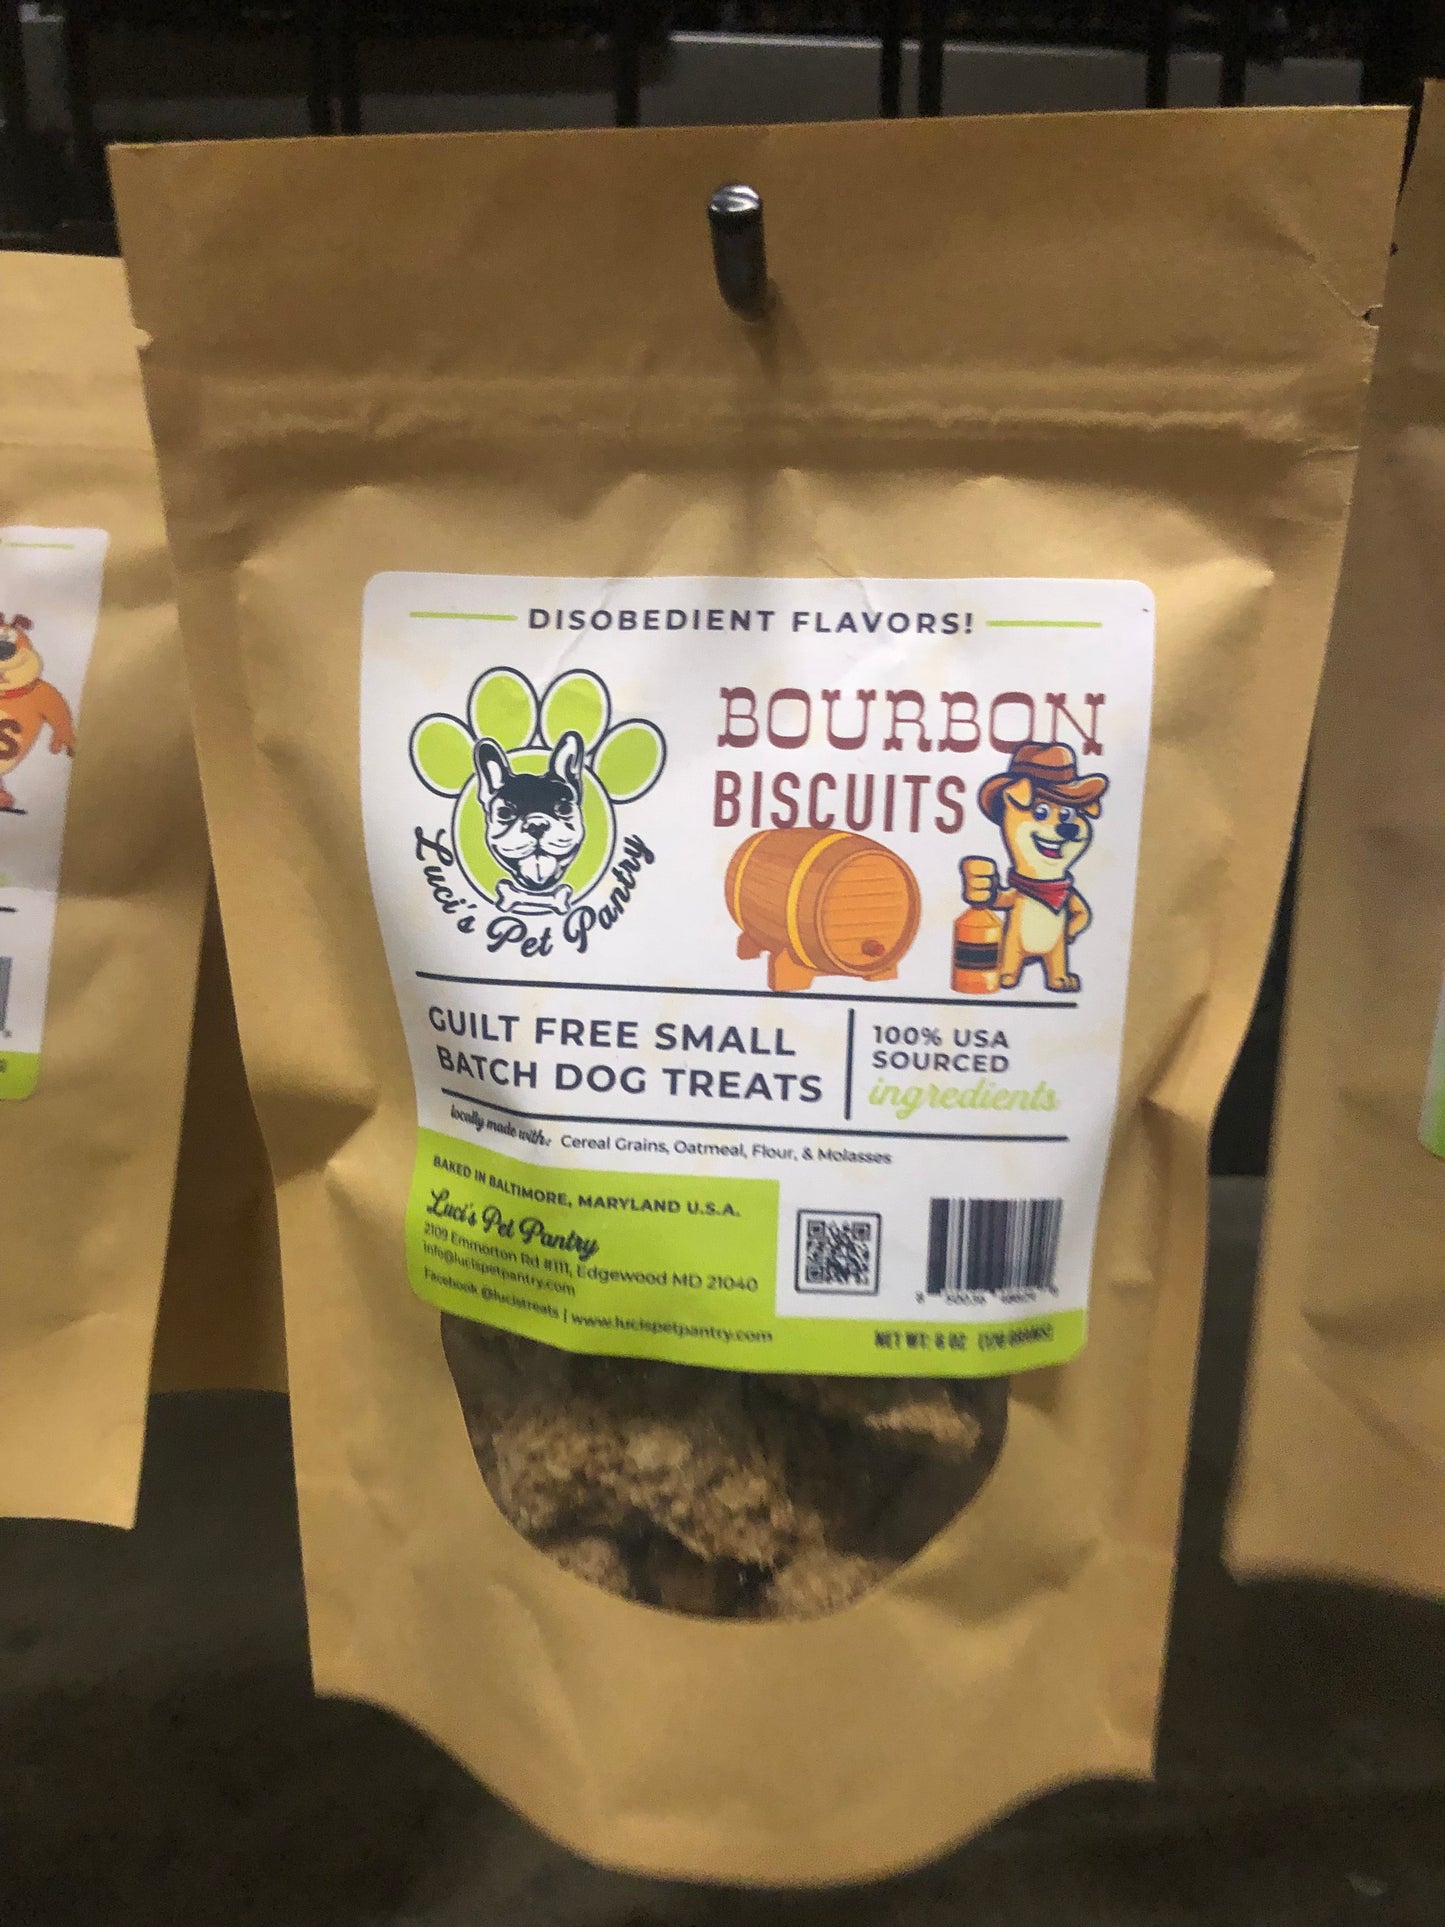 Moonshine Biscuits - All Natural "Cereal Grains" Dog & Puppy Treats - Disobedient Biscuits 6 oz. Pouch